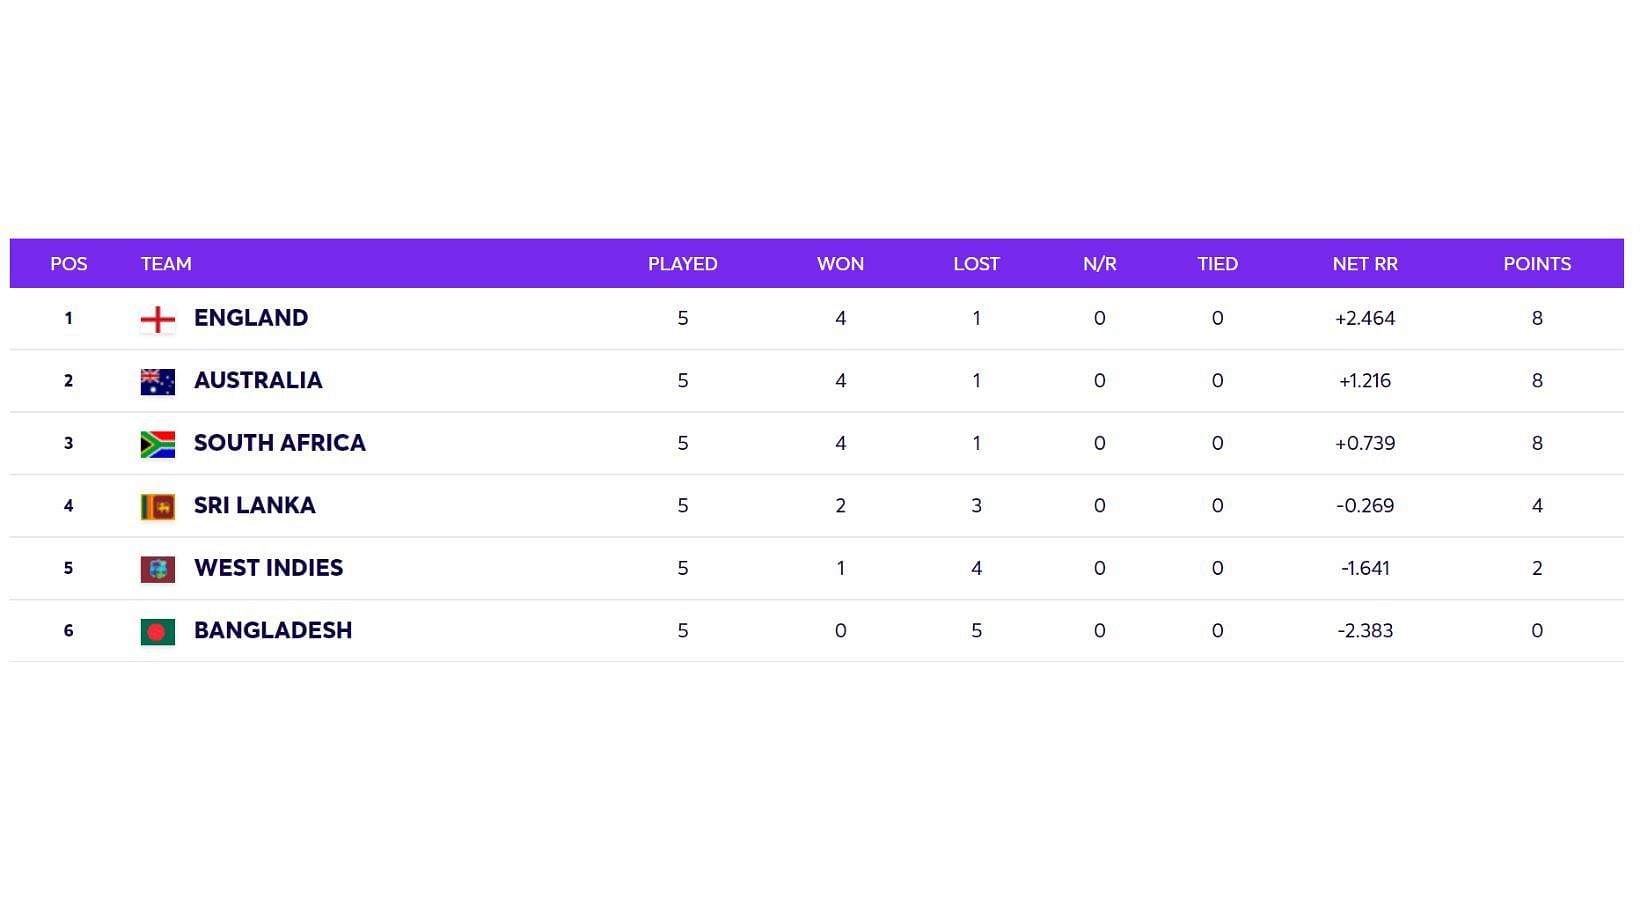 T20 World Cup 2021 Super 12 Group 1 points table updated after Sunday.